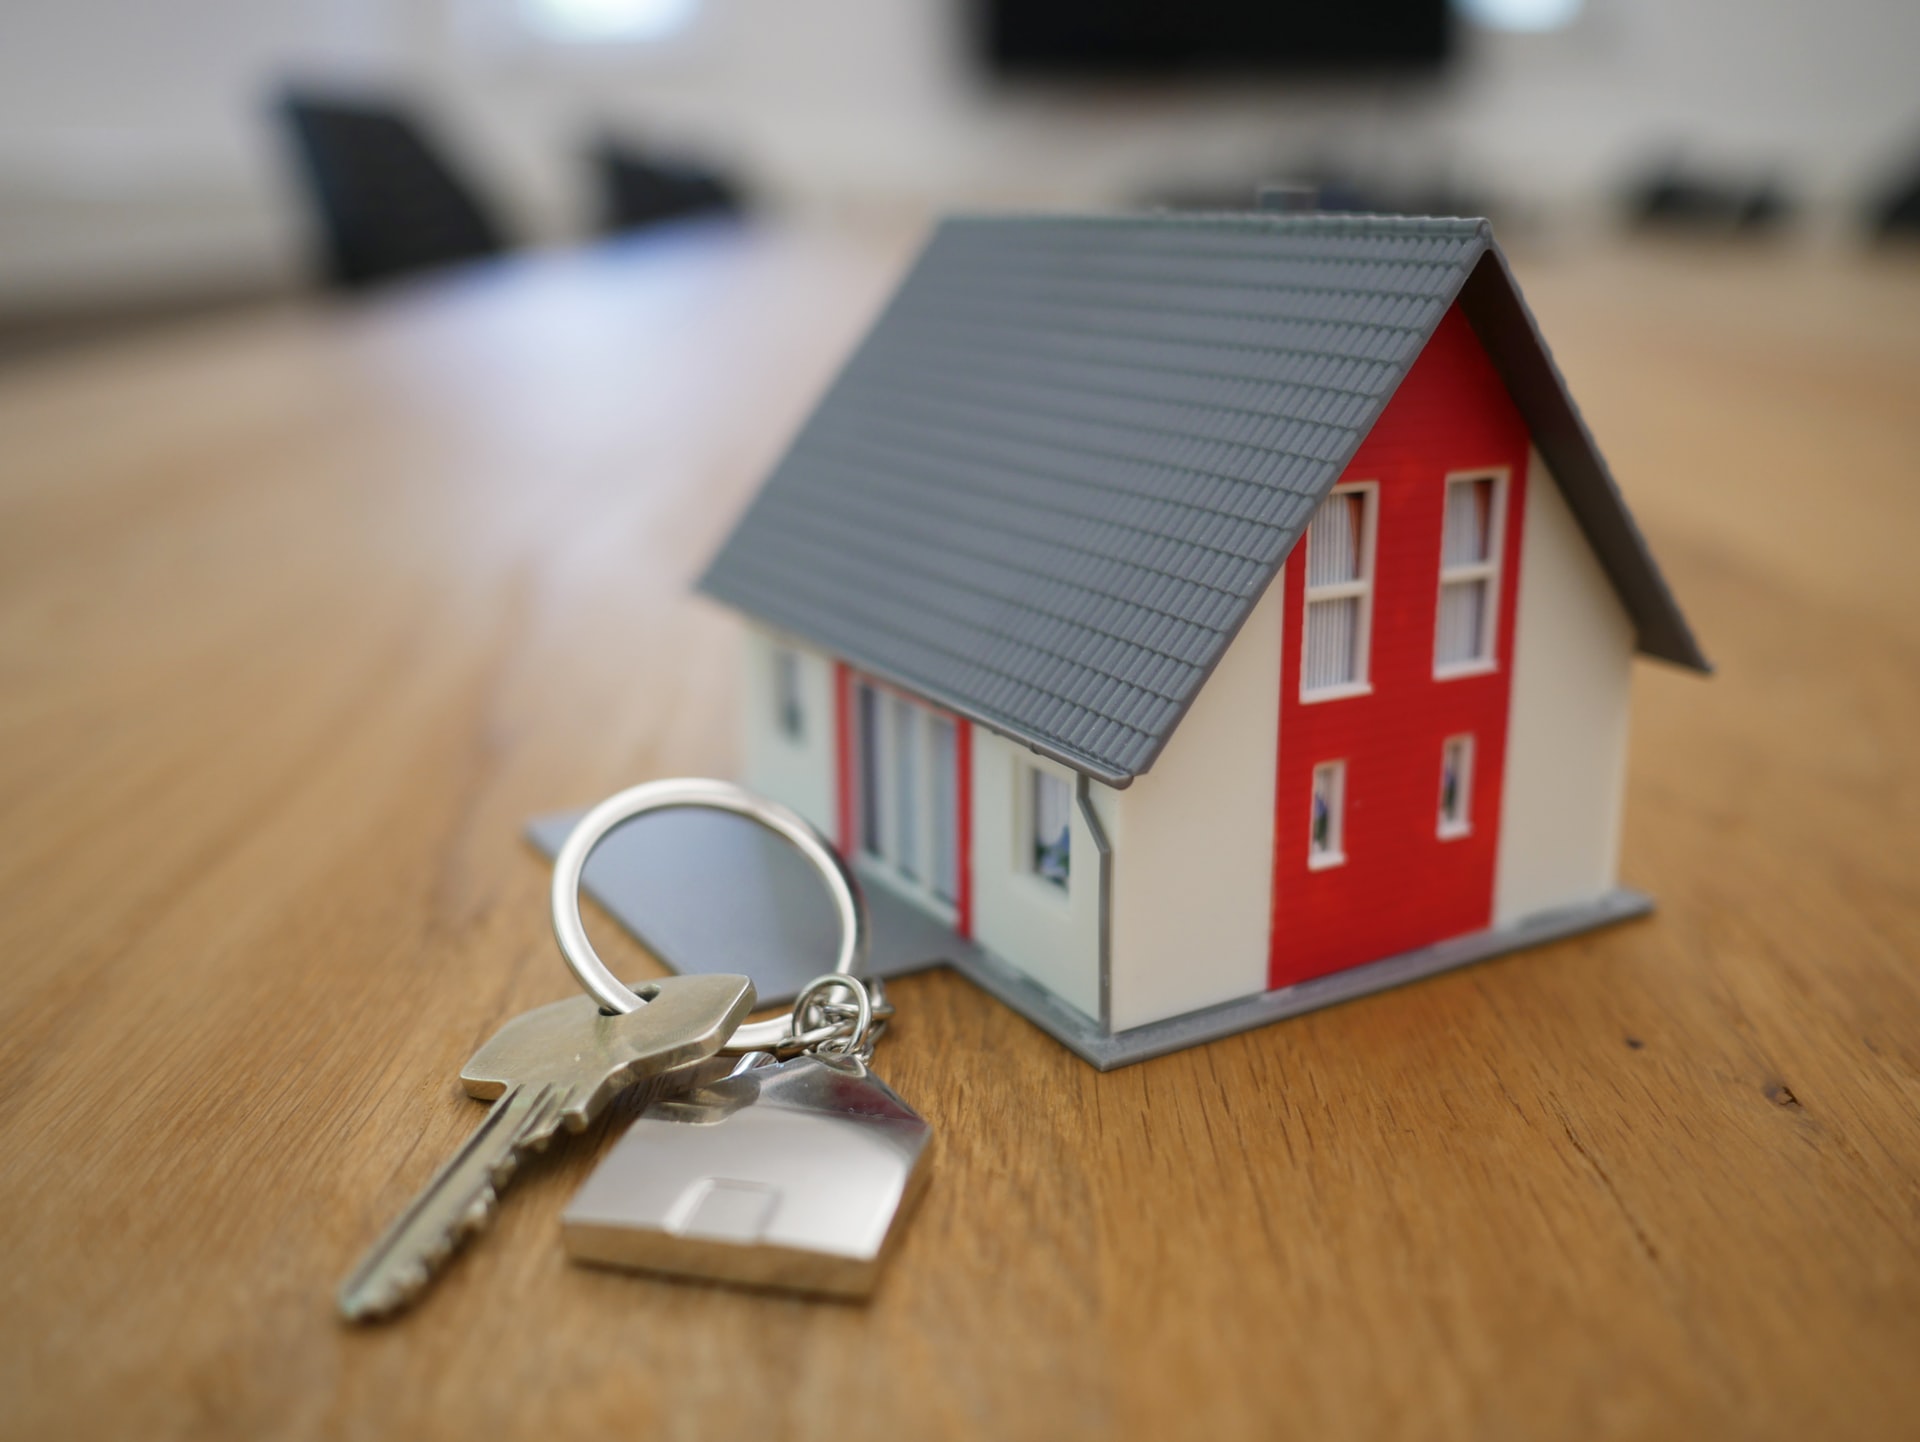 House key next to a small model house representing real estate agents who can now incorporate in Ontario